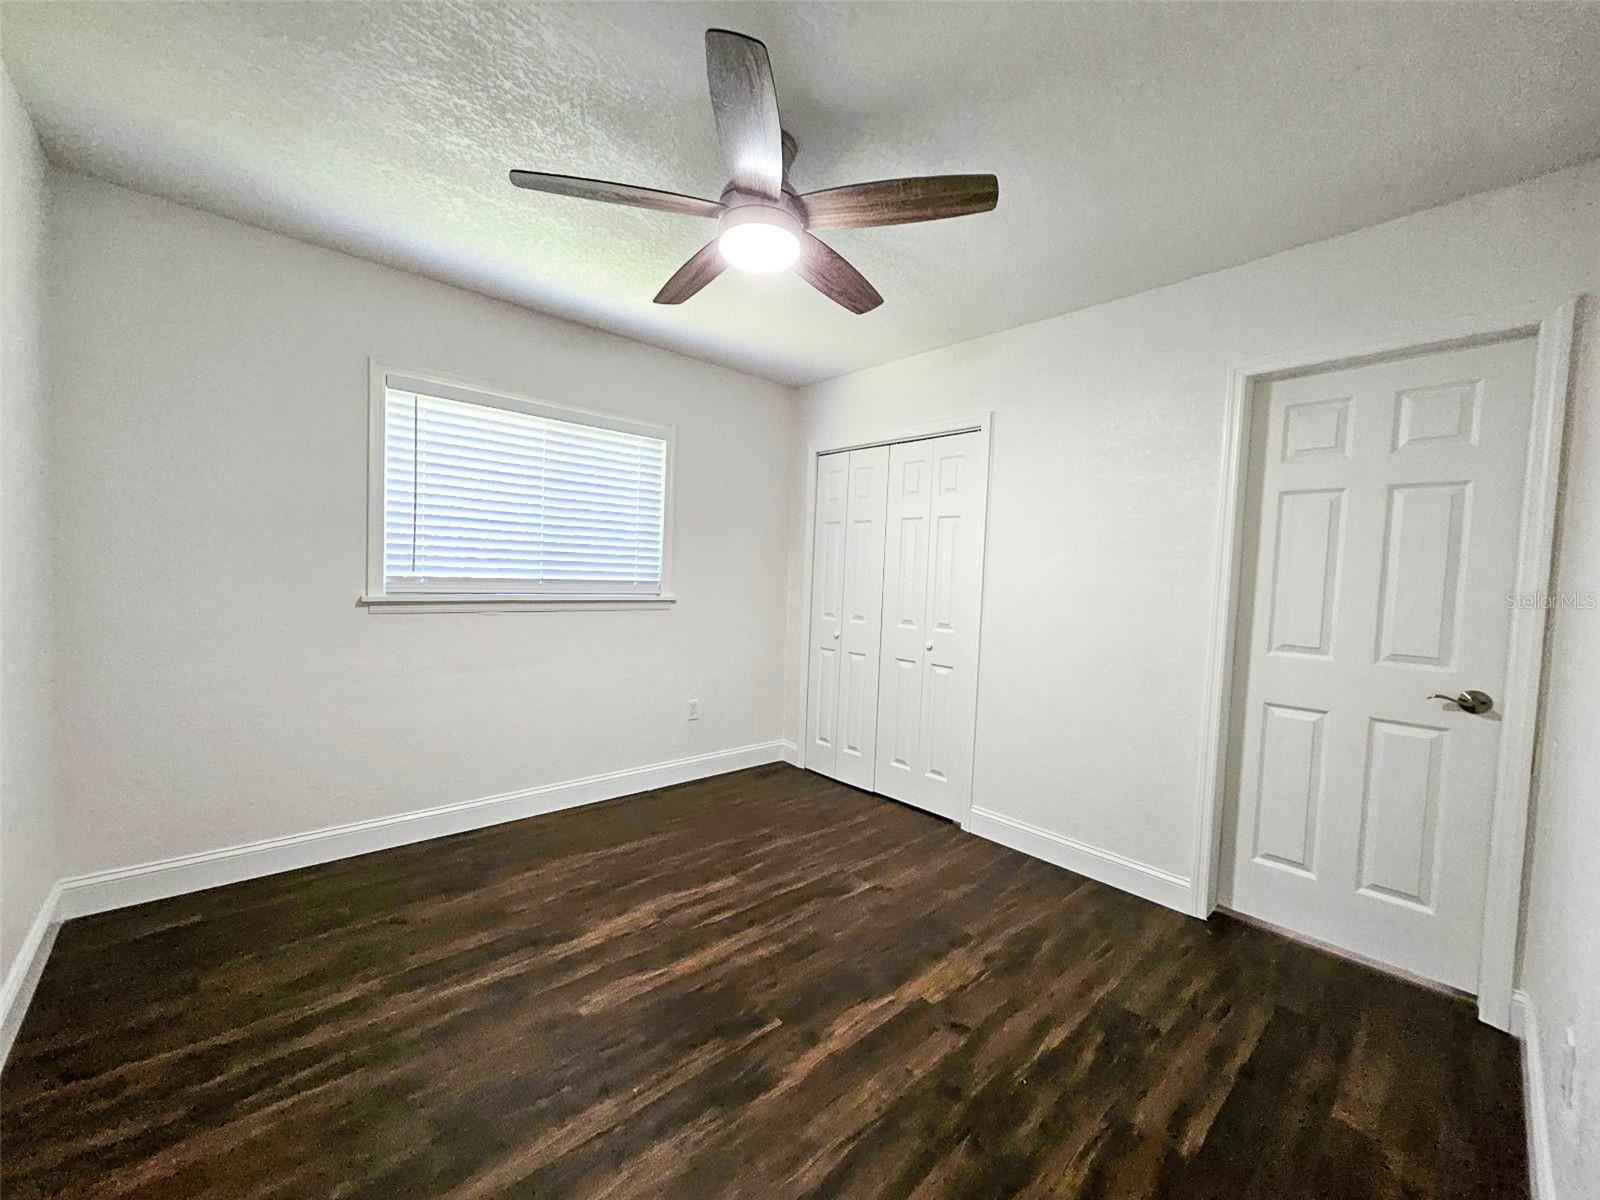 2nd Bedroom without staging